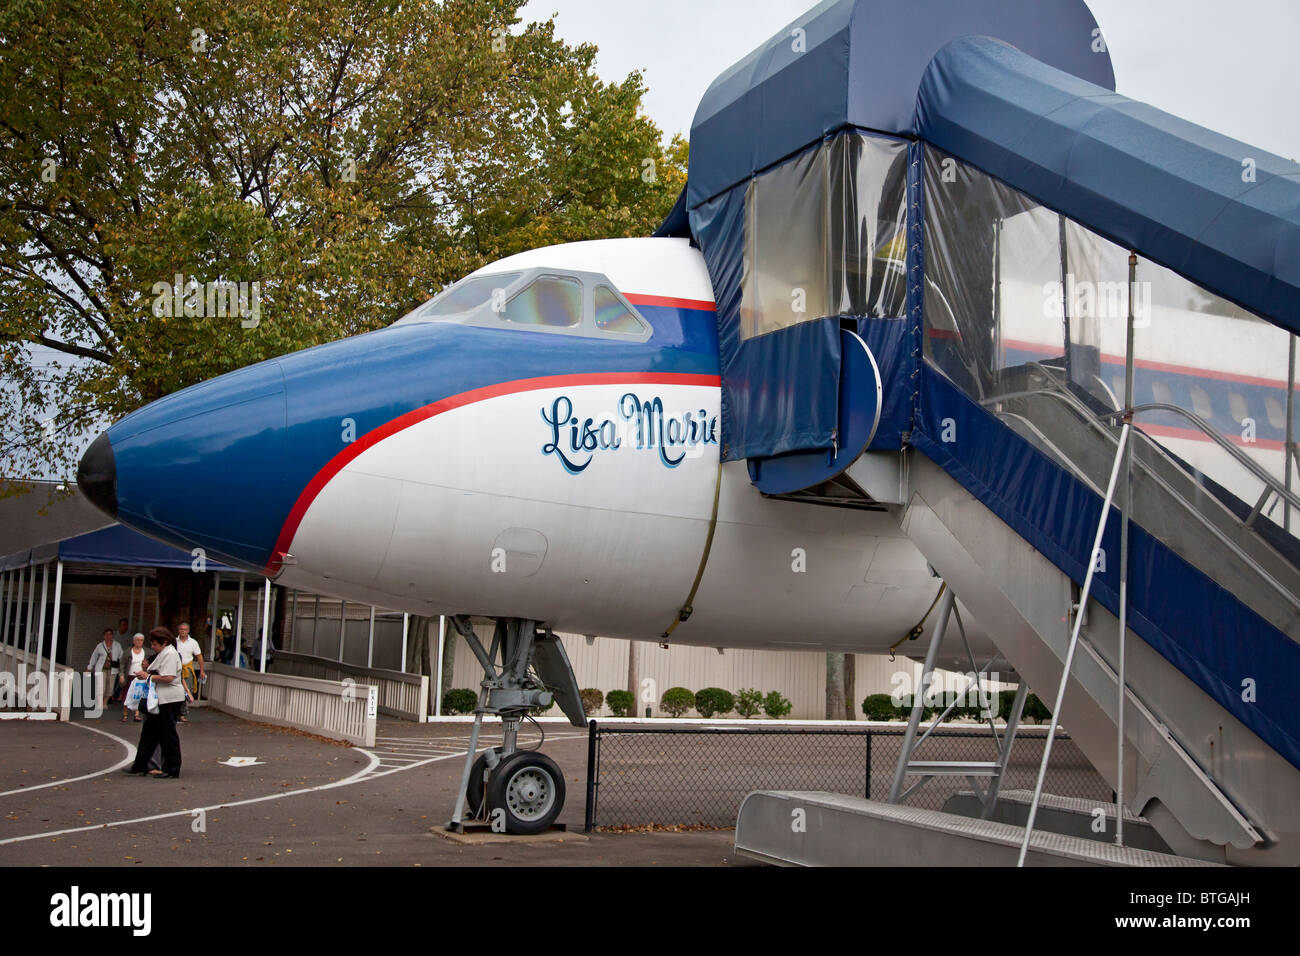 Lisa Marie, the Convair 880 jet bought by Elvis Presley  in 1975 Memphis, refurbished as his private jet. Graceland, Memphis TN Stock Photo